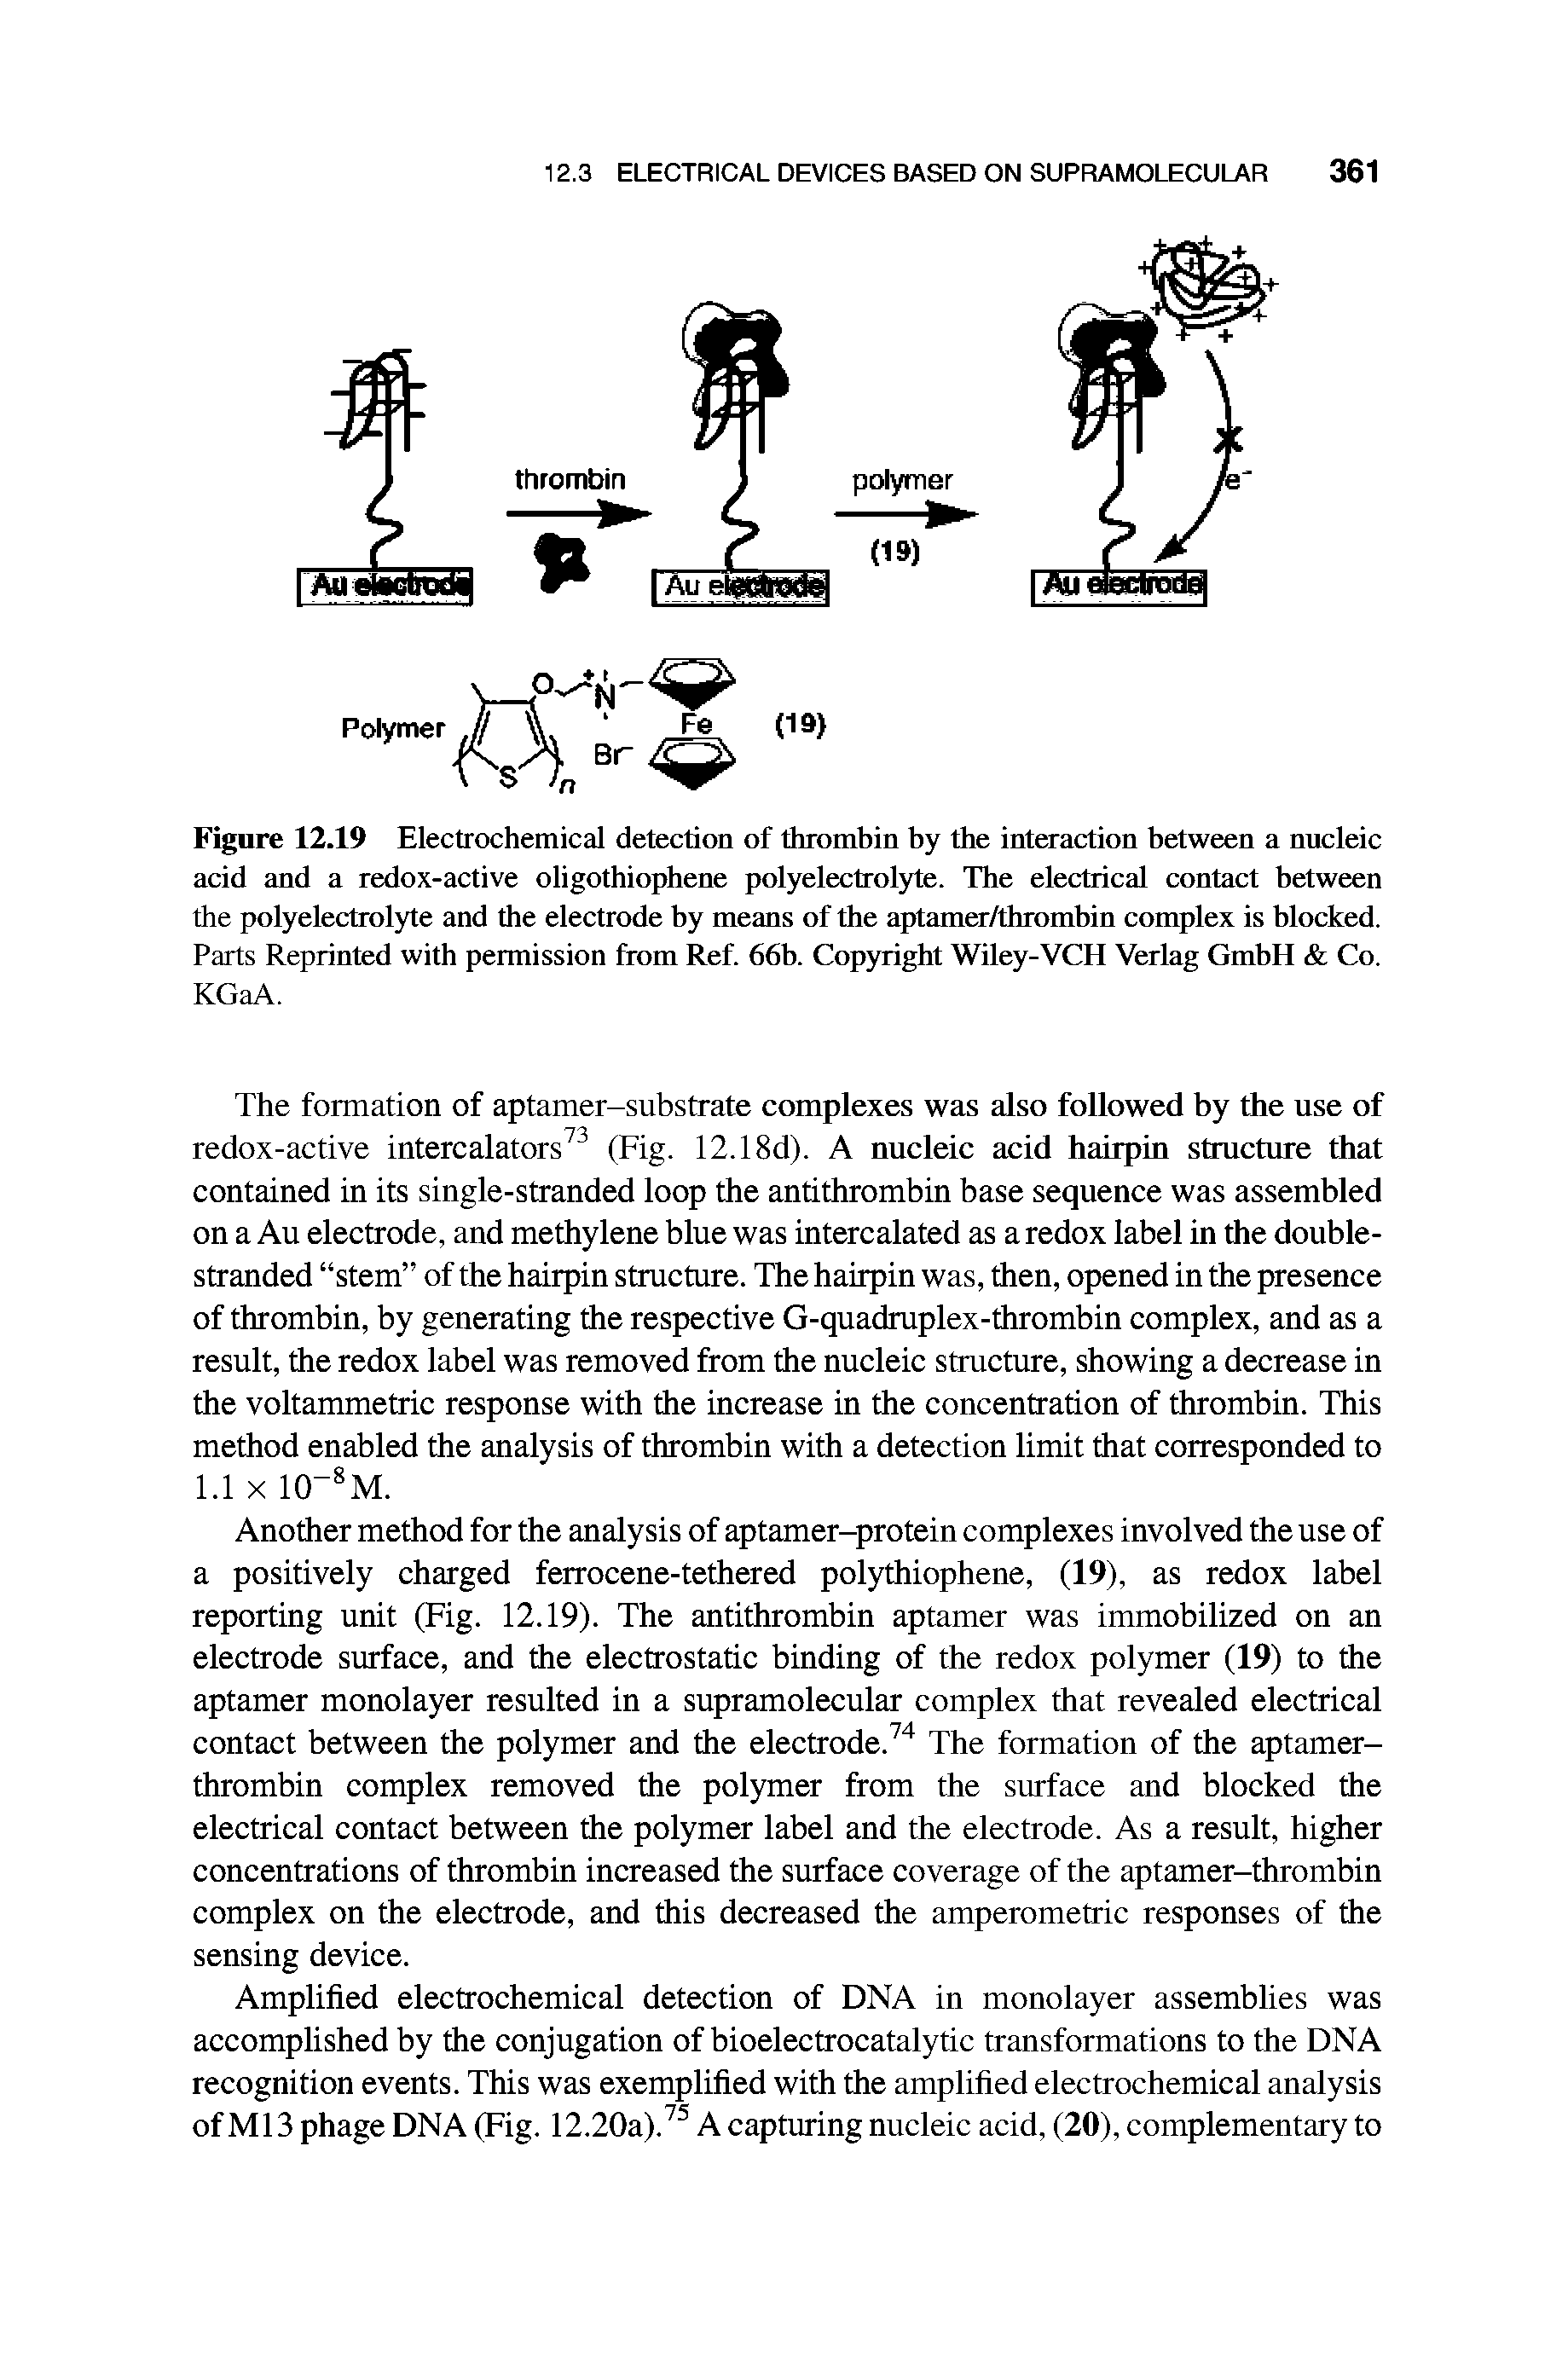 Figure 12.19 Electrochemical detection of thrombin by the interaction between a nucleic acid and a redox-active oligothiophene polyelectrolyte. The electrical contact between the polyelectrolyte and the electrode by means of the aptamer/thrombin complex is blocked. Parts Reprinted with permission from Ref. 66b. Copyright Wiley-VCH Verlag GmbH Co.